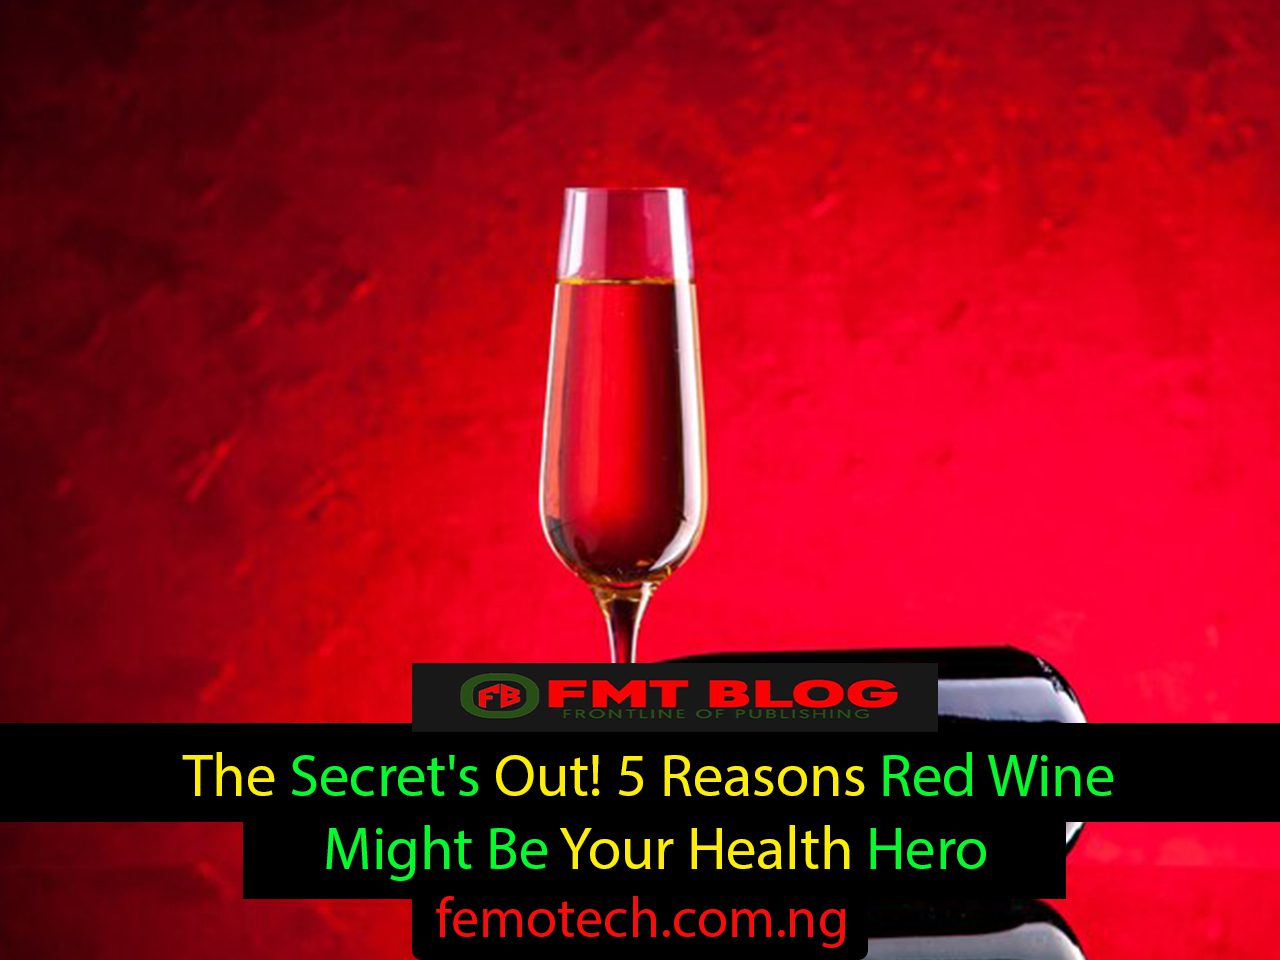 The Secret’s Out! 5 Reasons Red Wine Might Be Your Health Hero